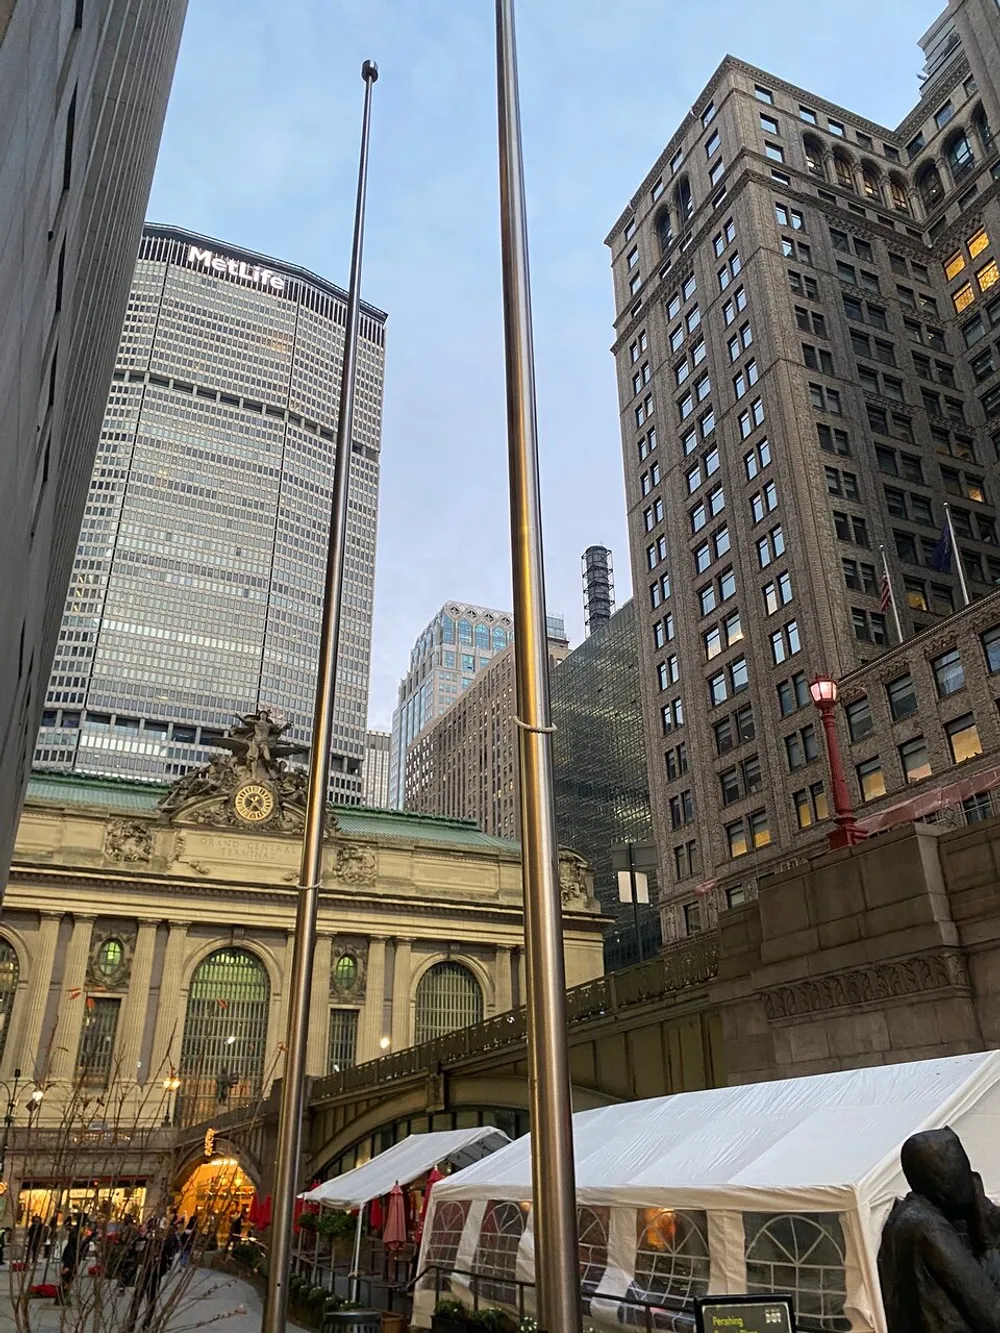 The image captures a cityscape with a mix of architectural styles showcasing the facade of a classic building in the foreground modern skyscrapers in the background and a flagpole without a flag to the left suggesting an urban setting likely in a downtown area